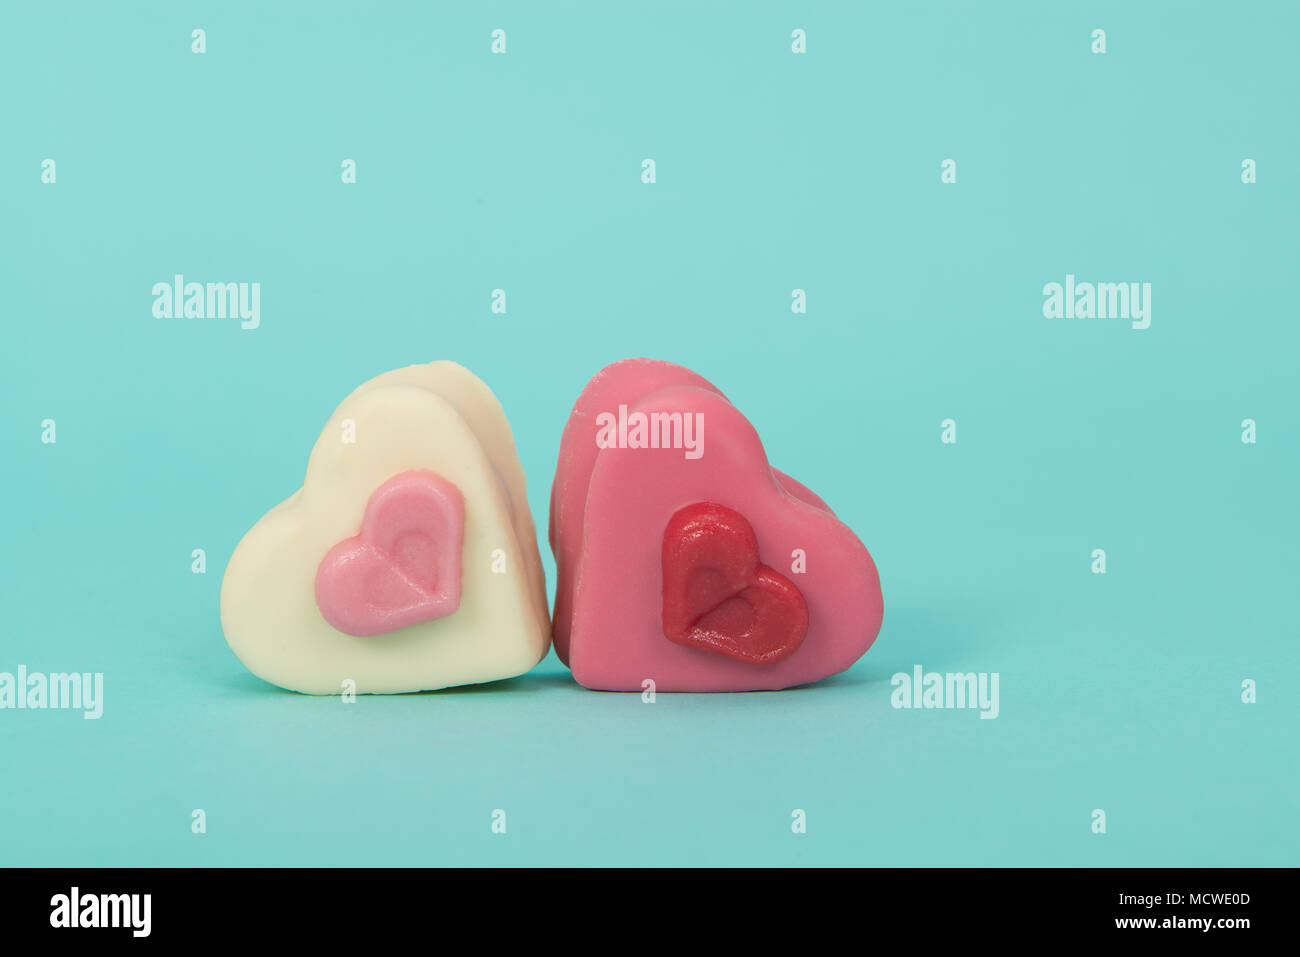 Two heart sheaped pink petit four candy's on a turquoise background Stock Photo